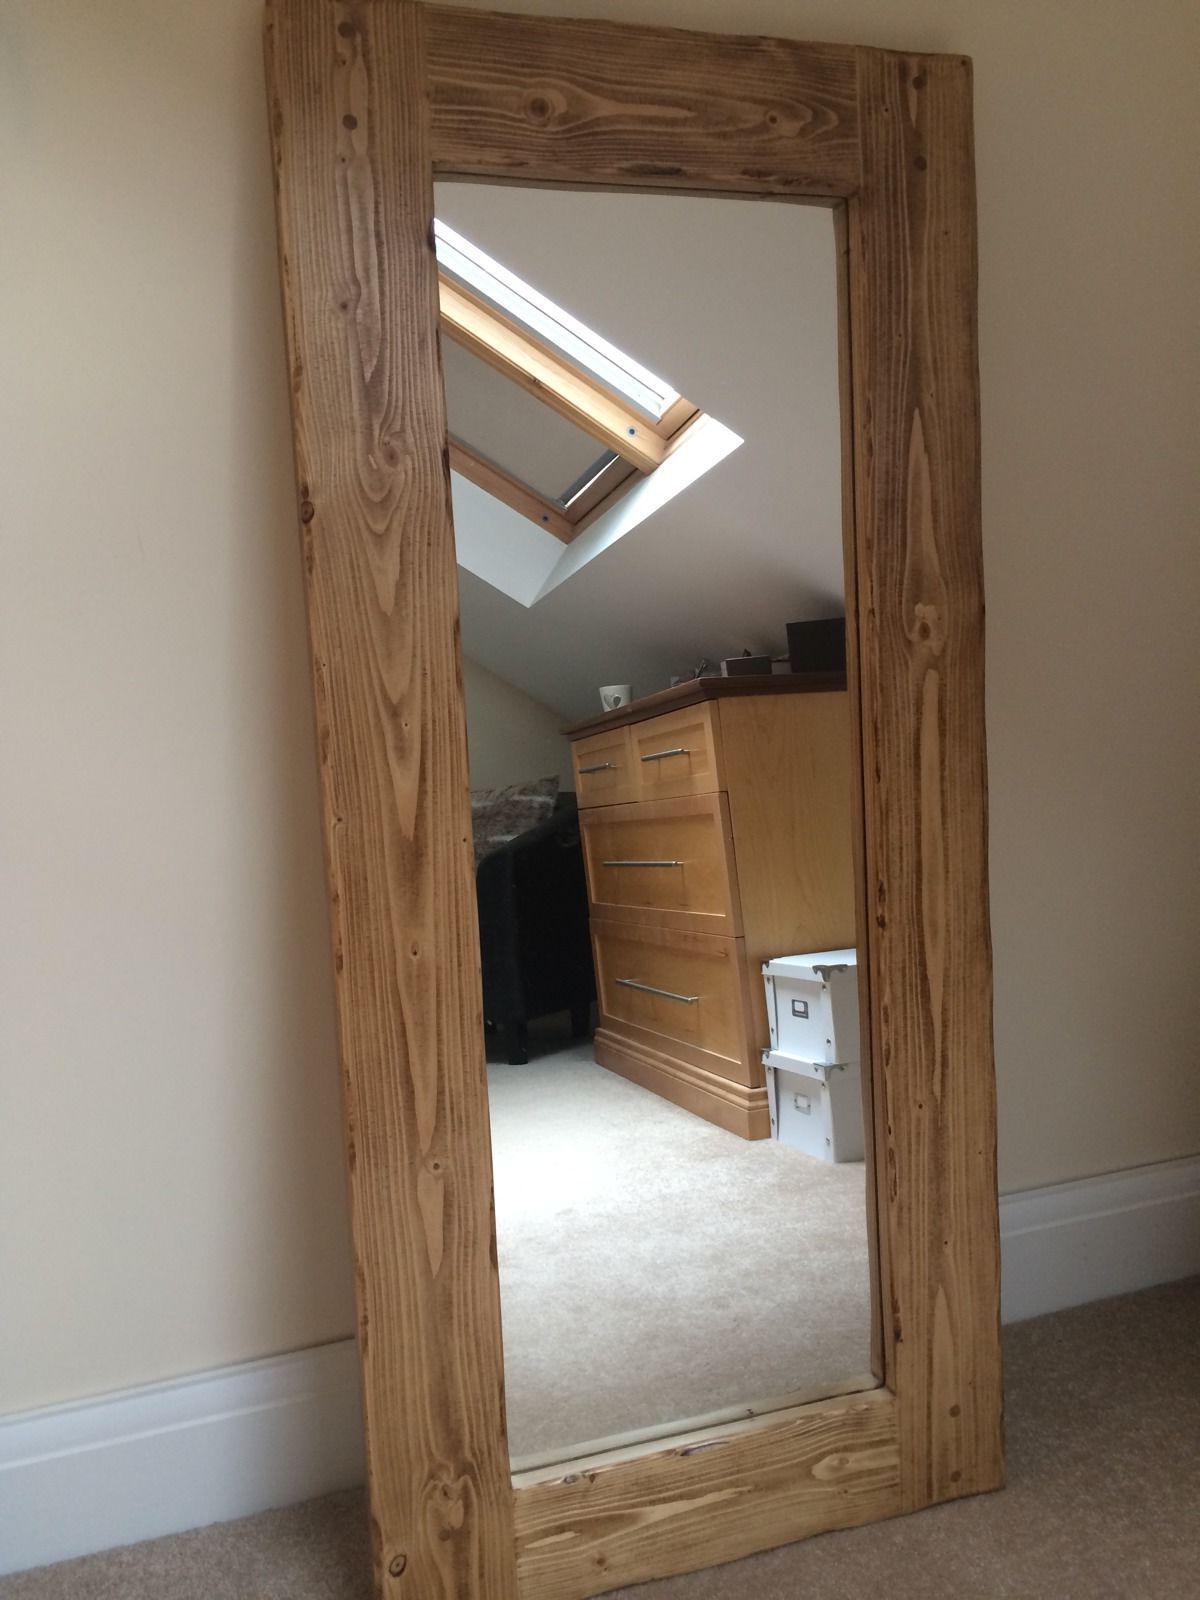 Details About *beautiful Quality Handmade Chunky Rustic Full Length Regarding Recent Handcrafted Farmhouse Full Length Mirrors (View 20 of 20)